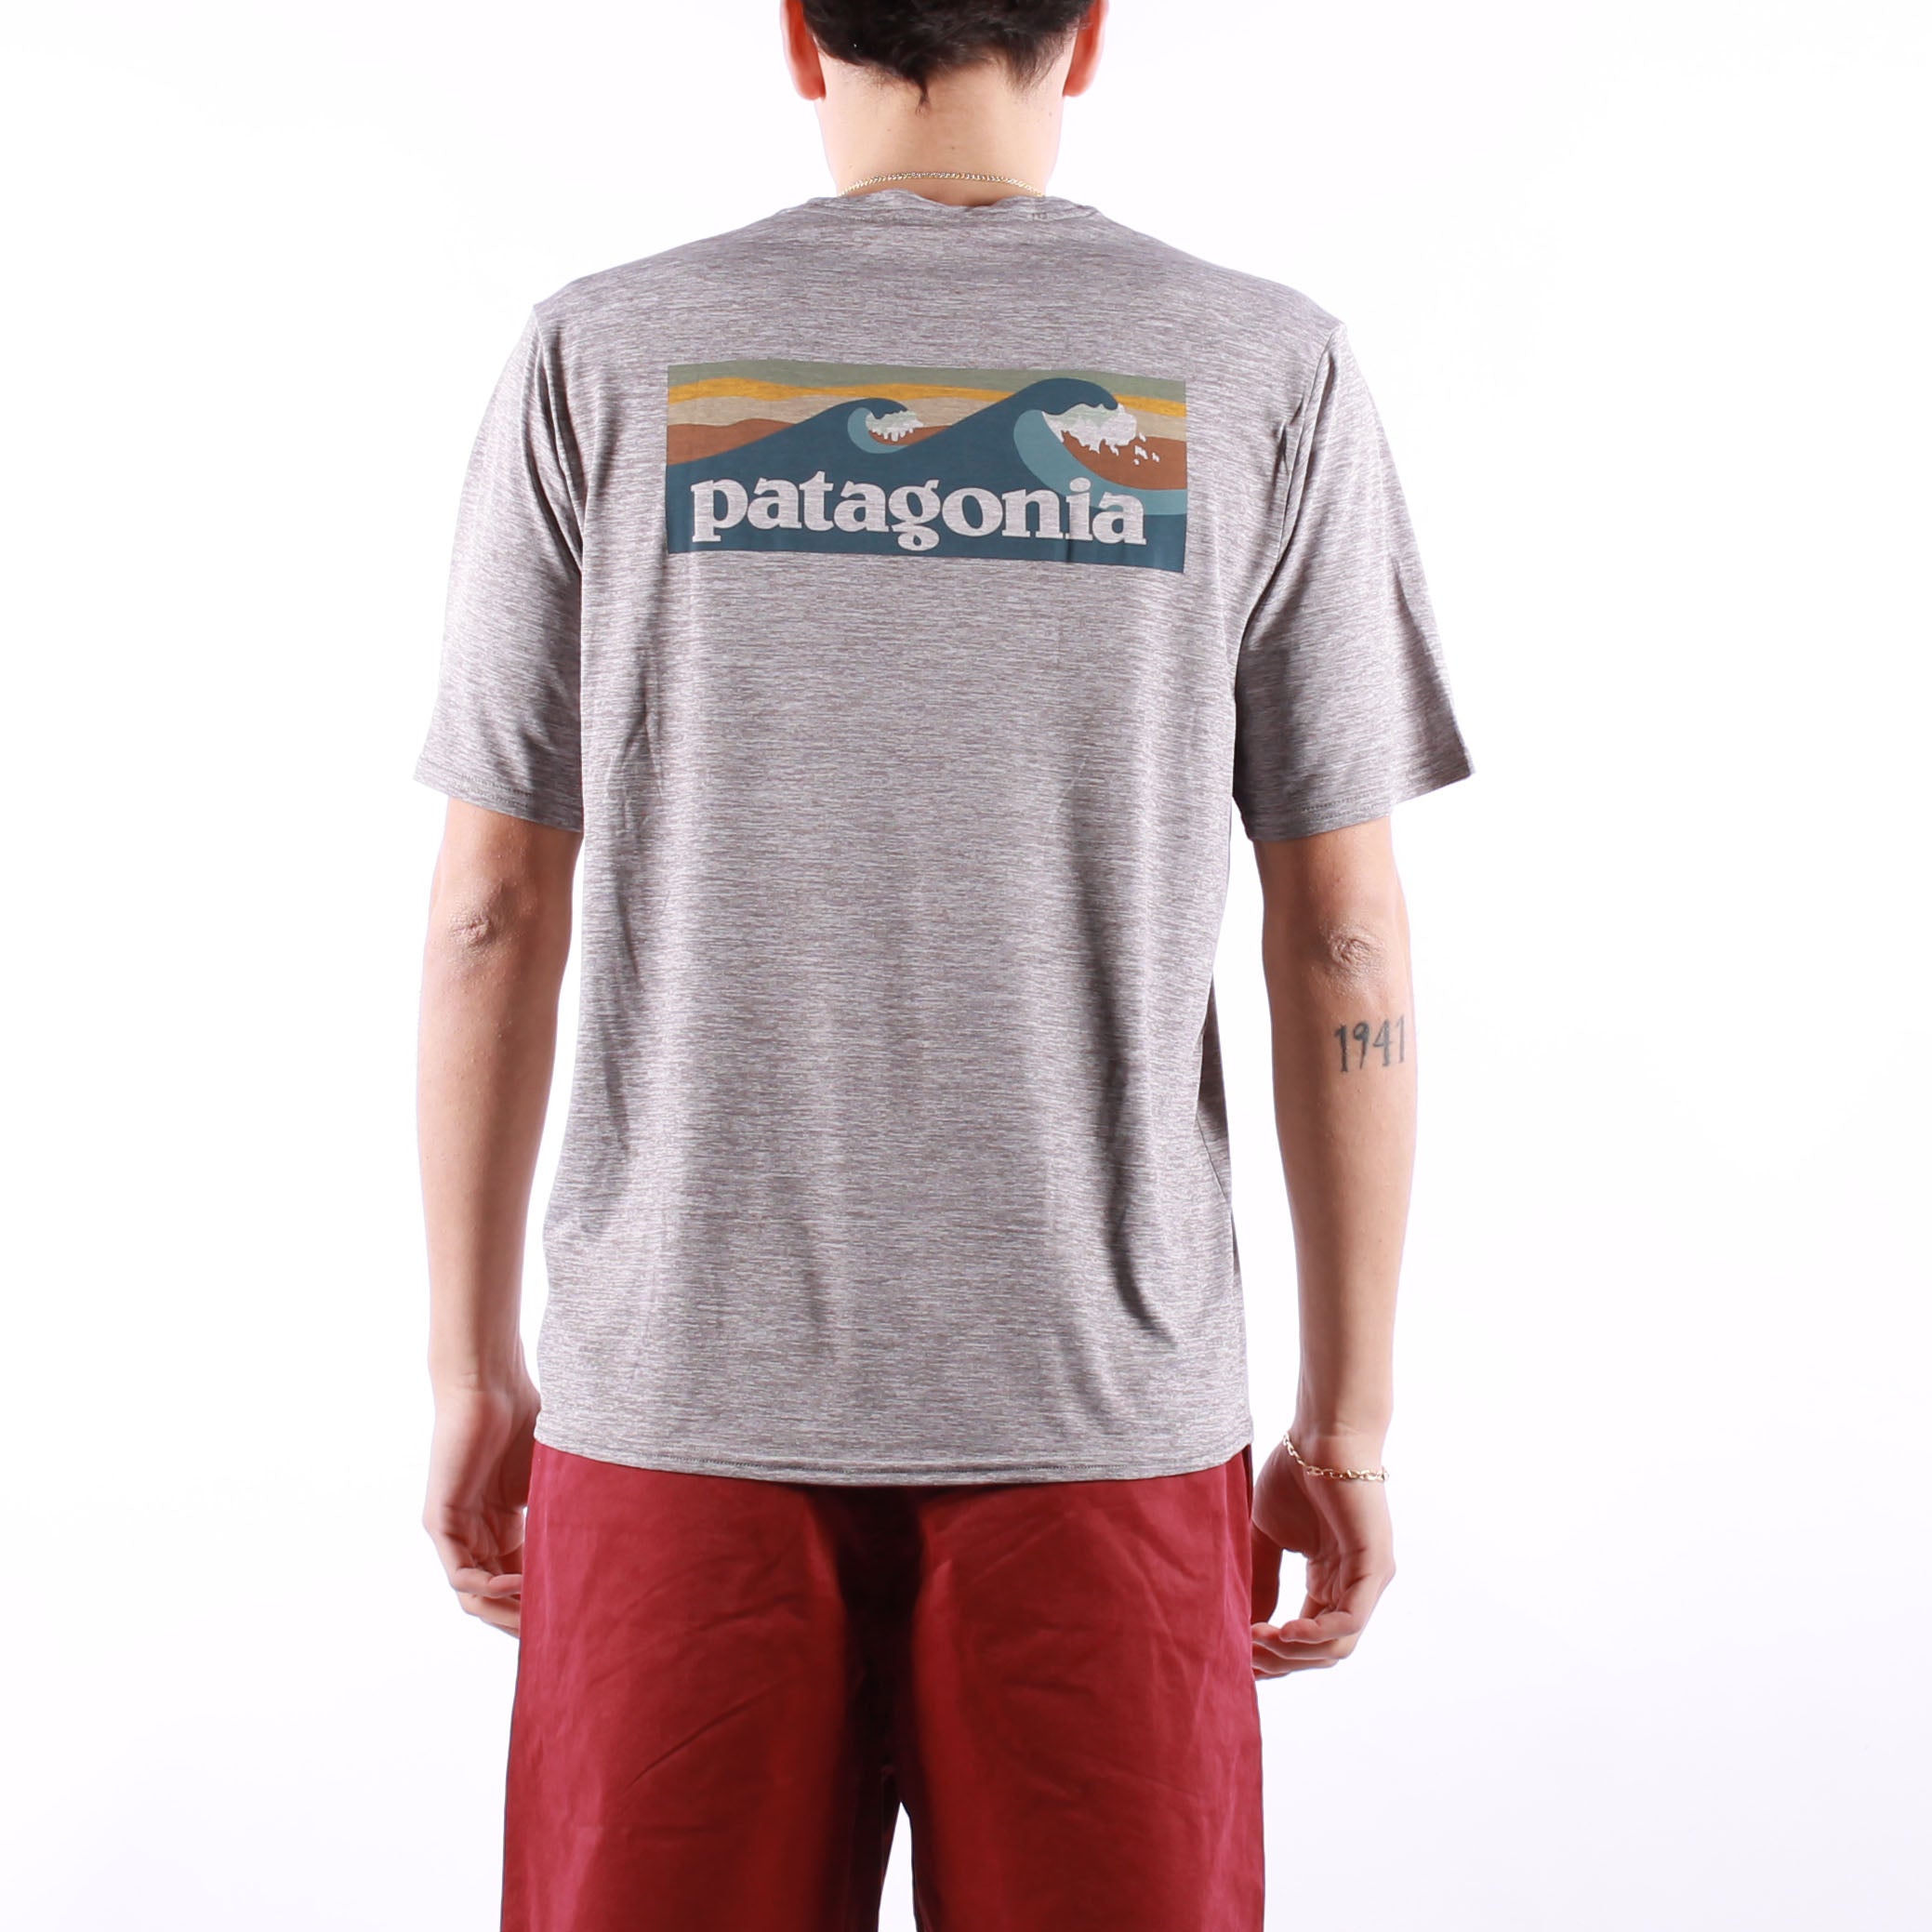 Patagonia - Ms Cap Cool Daily Graphic Tee - Abalone Blue Feather Grey | Patagonia | T-Shirt | 55.00 | Beach Break Shop